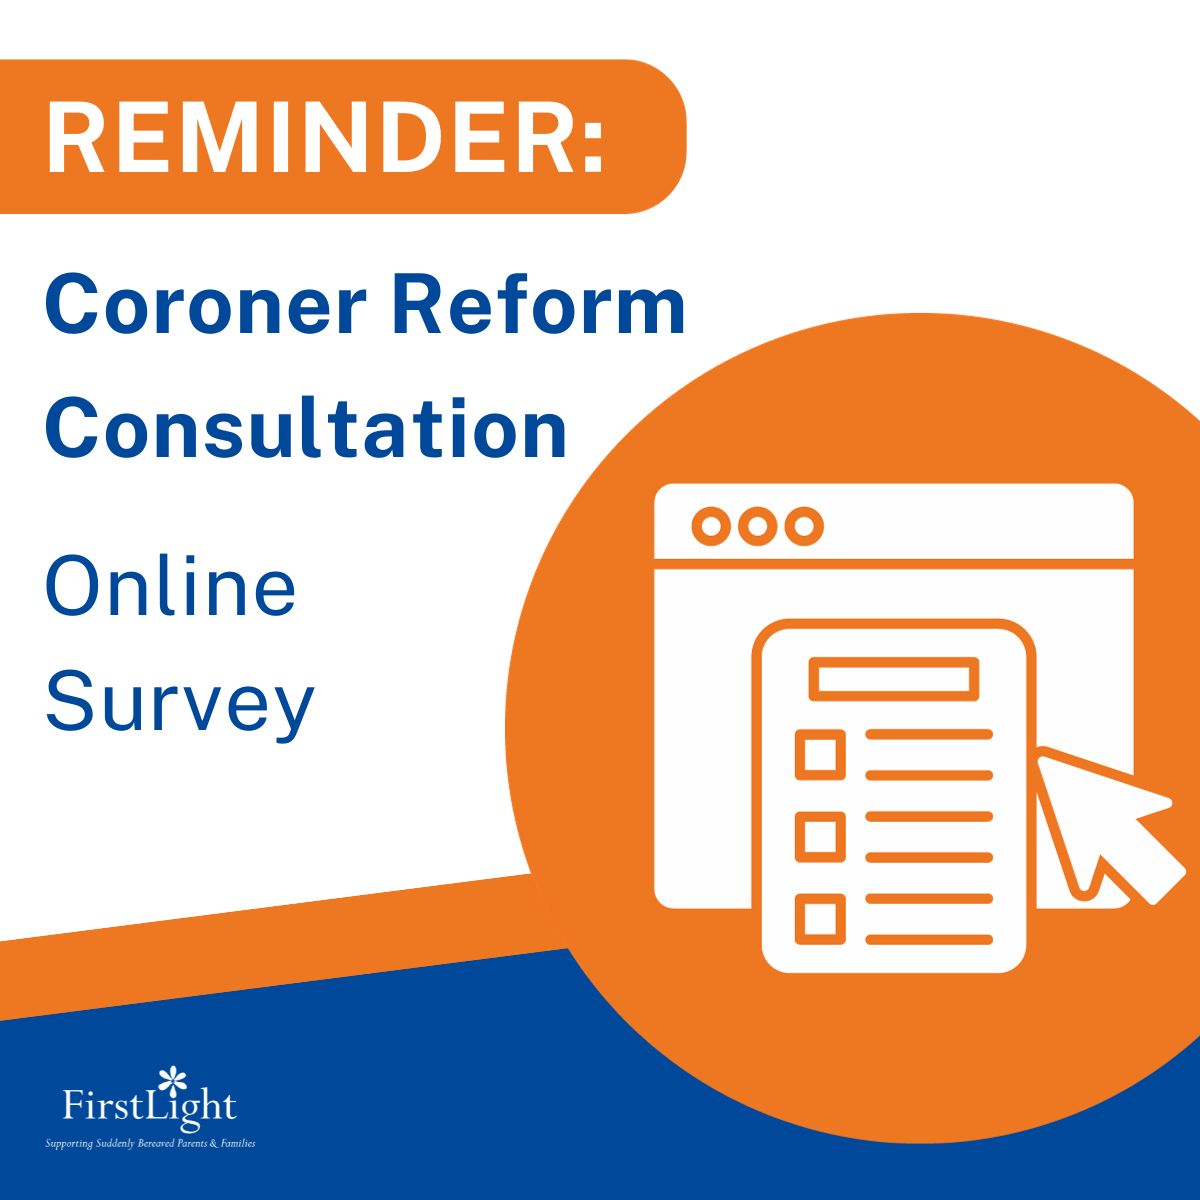 Reminder: Coroner Reform Consultation Online Survey - have your say by visiting buff.ly/3tJUclY